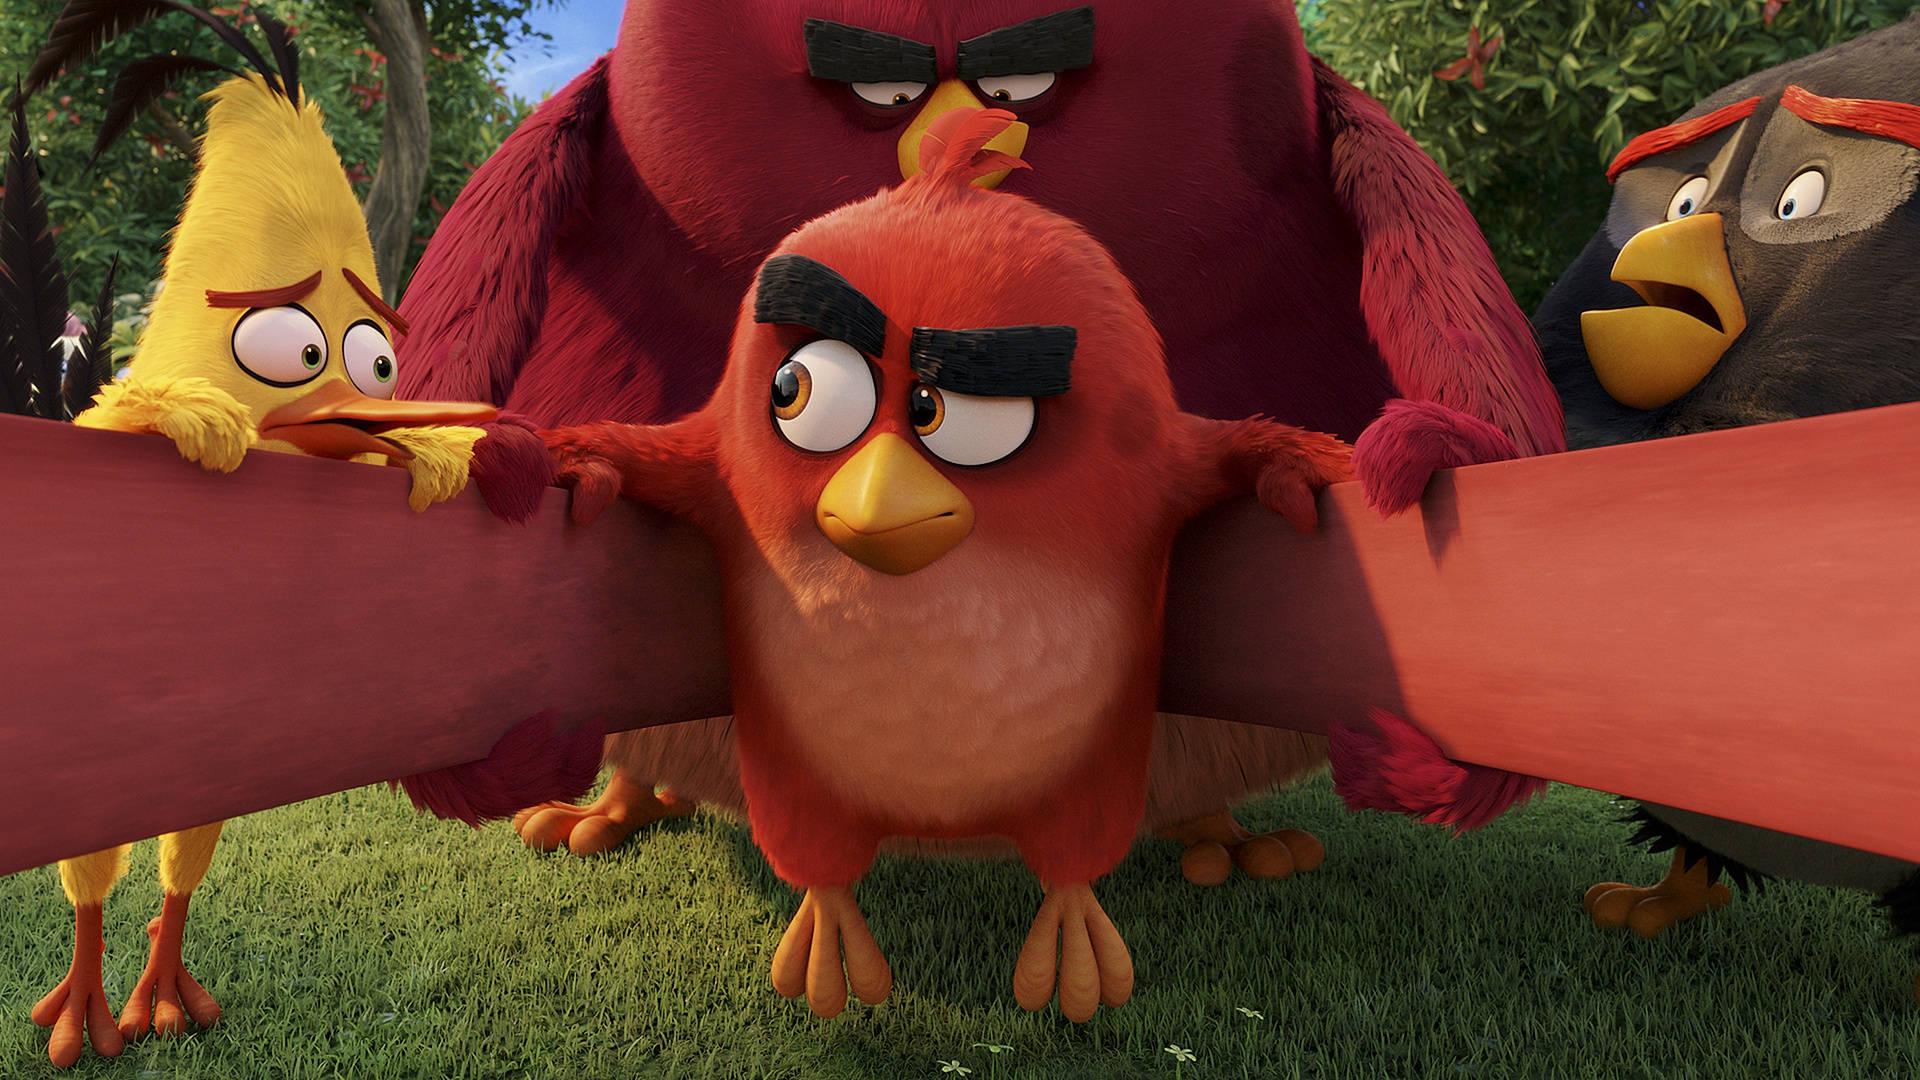 Catapult Scene From The Angry Birds Movie Wallpaper